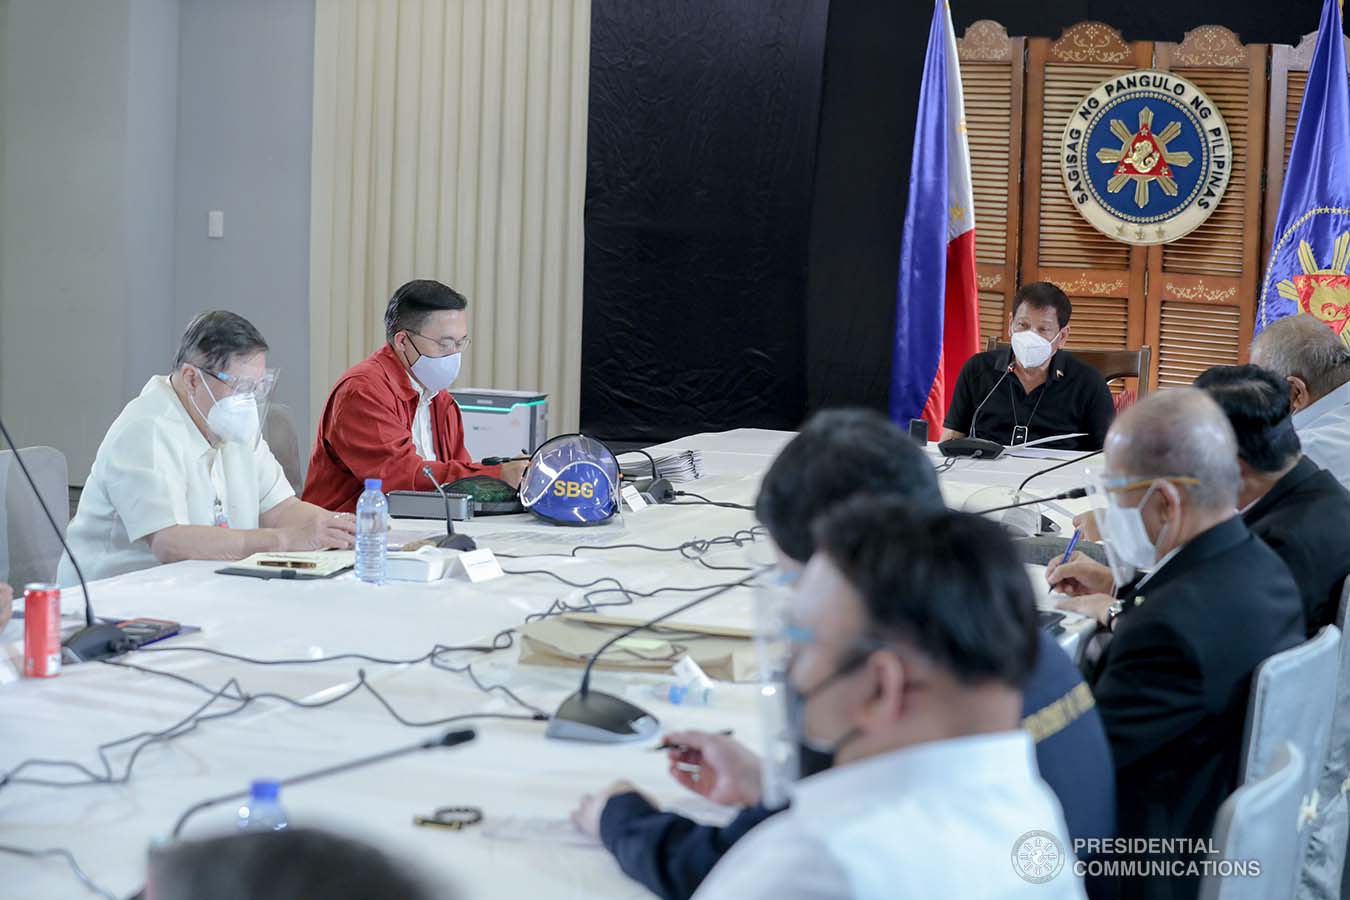 President Rodrigo Roa Duterte holds a meeting with the Inter-Agency Task Force on the Emerging Infectious Diseases (IATF-EID) core members at the Matina Enclaves in Davao City on August 24, 2020. ROBINSON NIÑAL JR./PRESIDENTIAL PHOTO